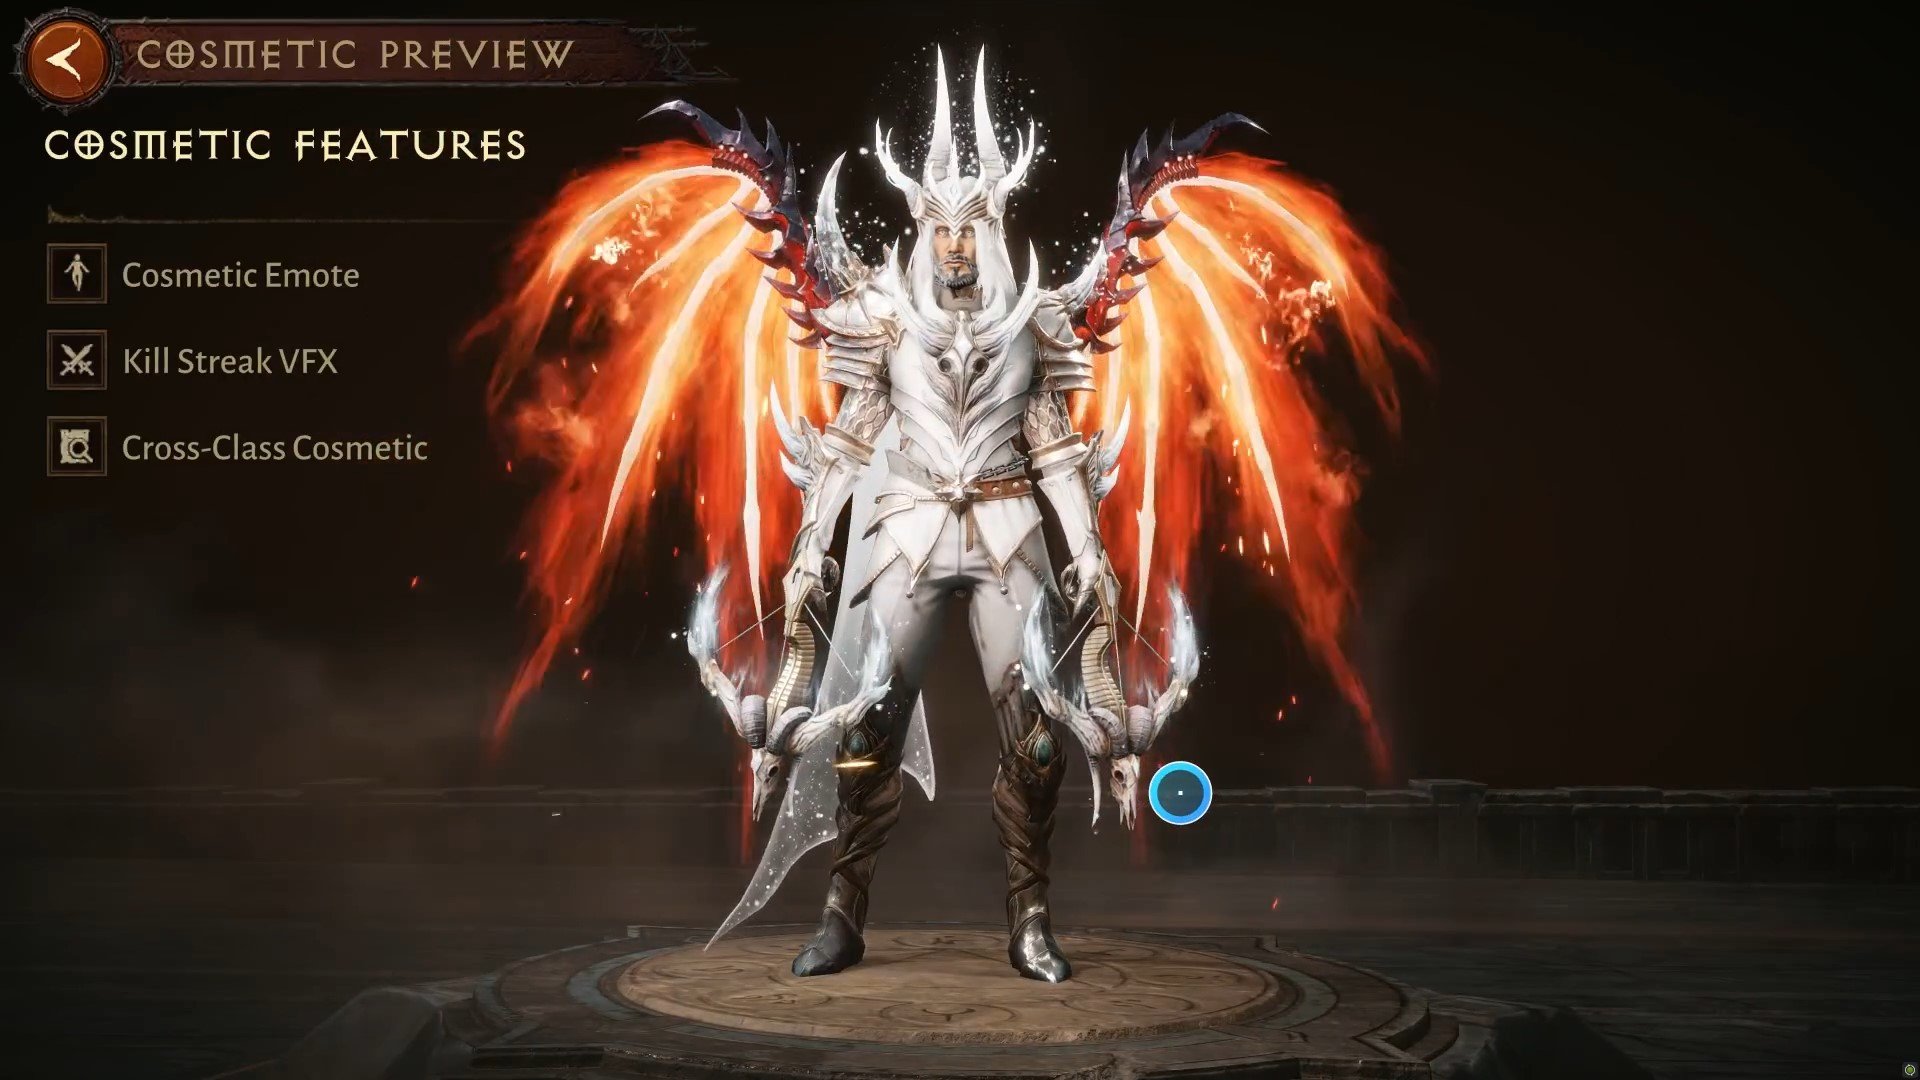 Diablo Immortal: Every Class Ranked Worst to Best